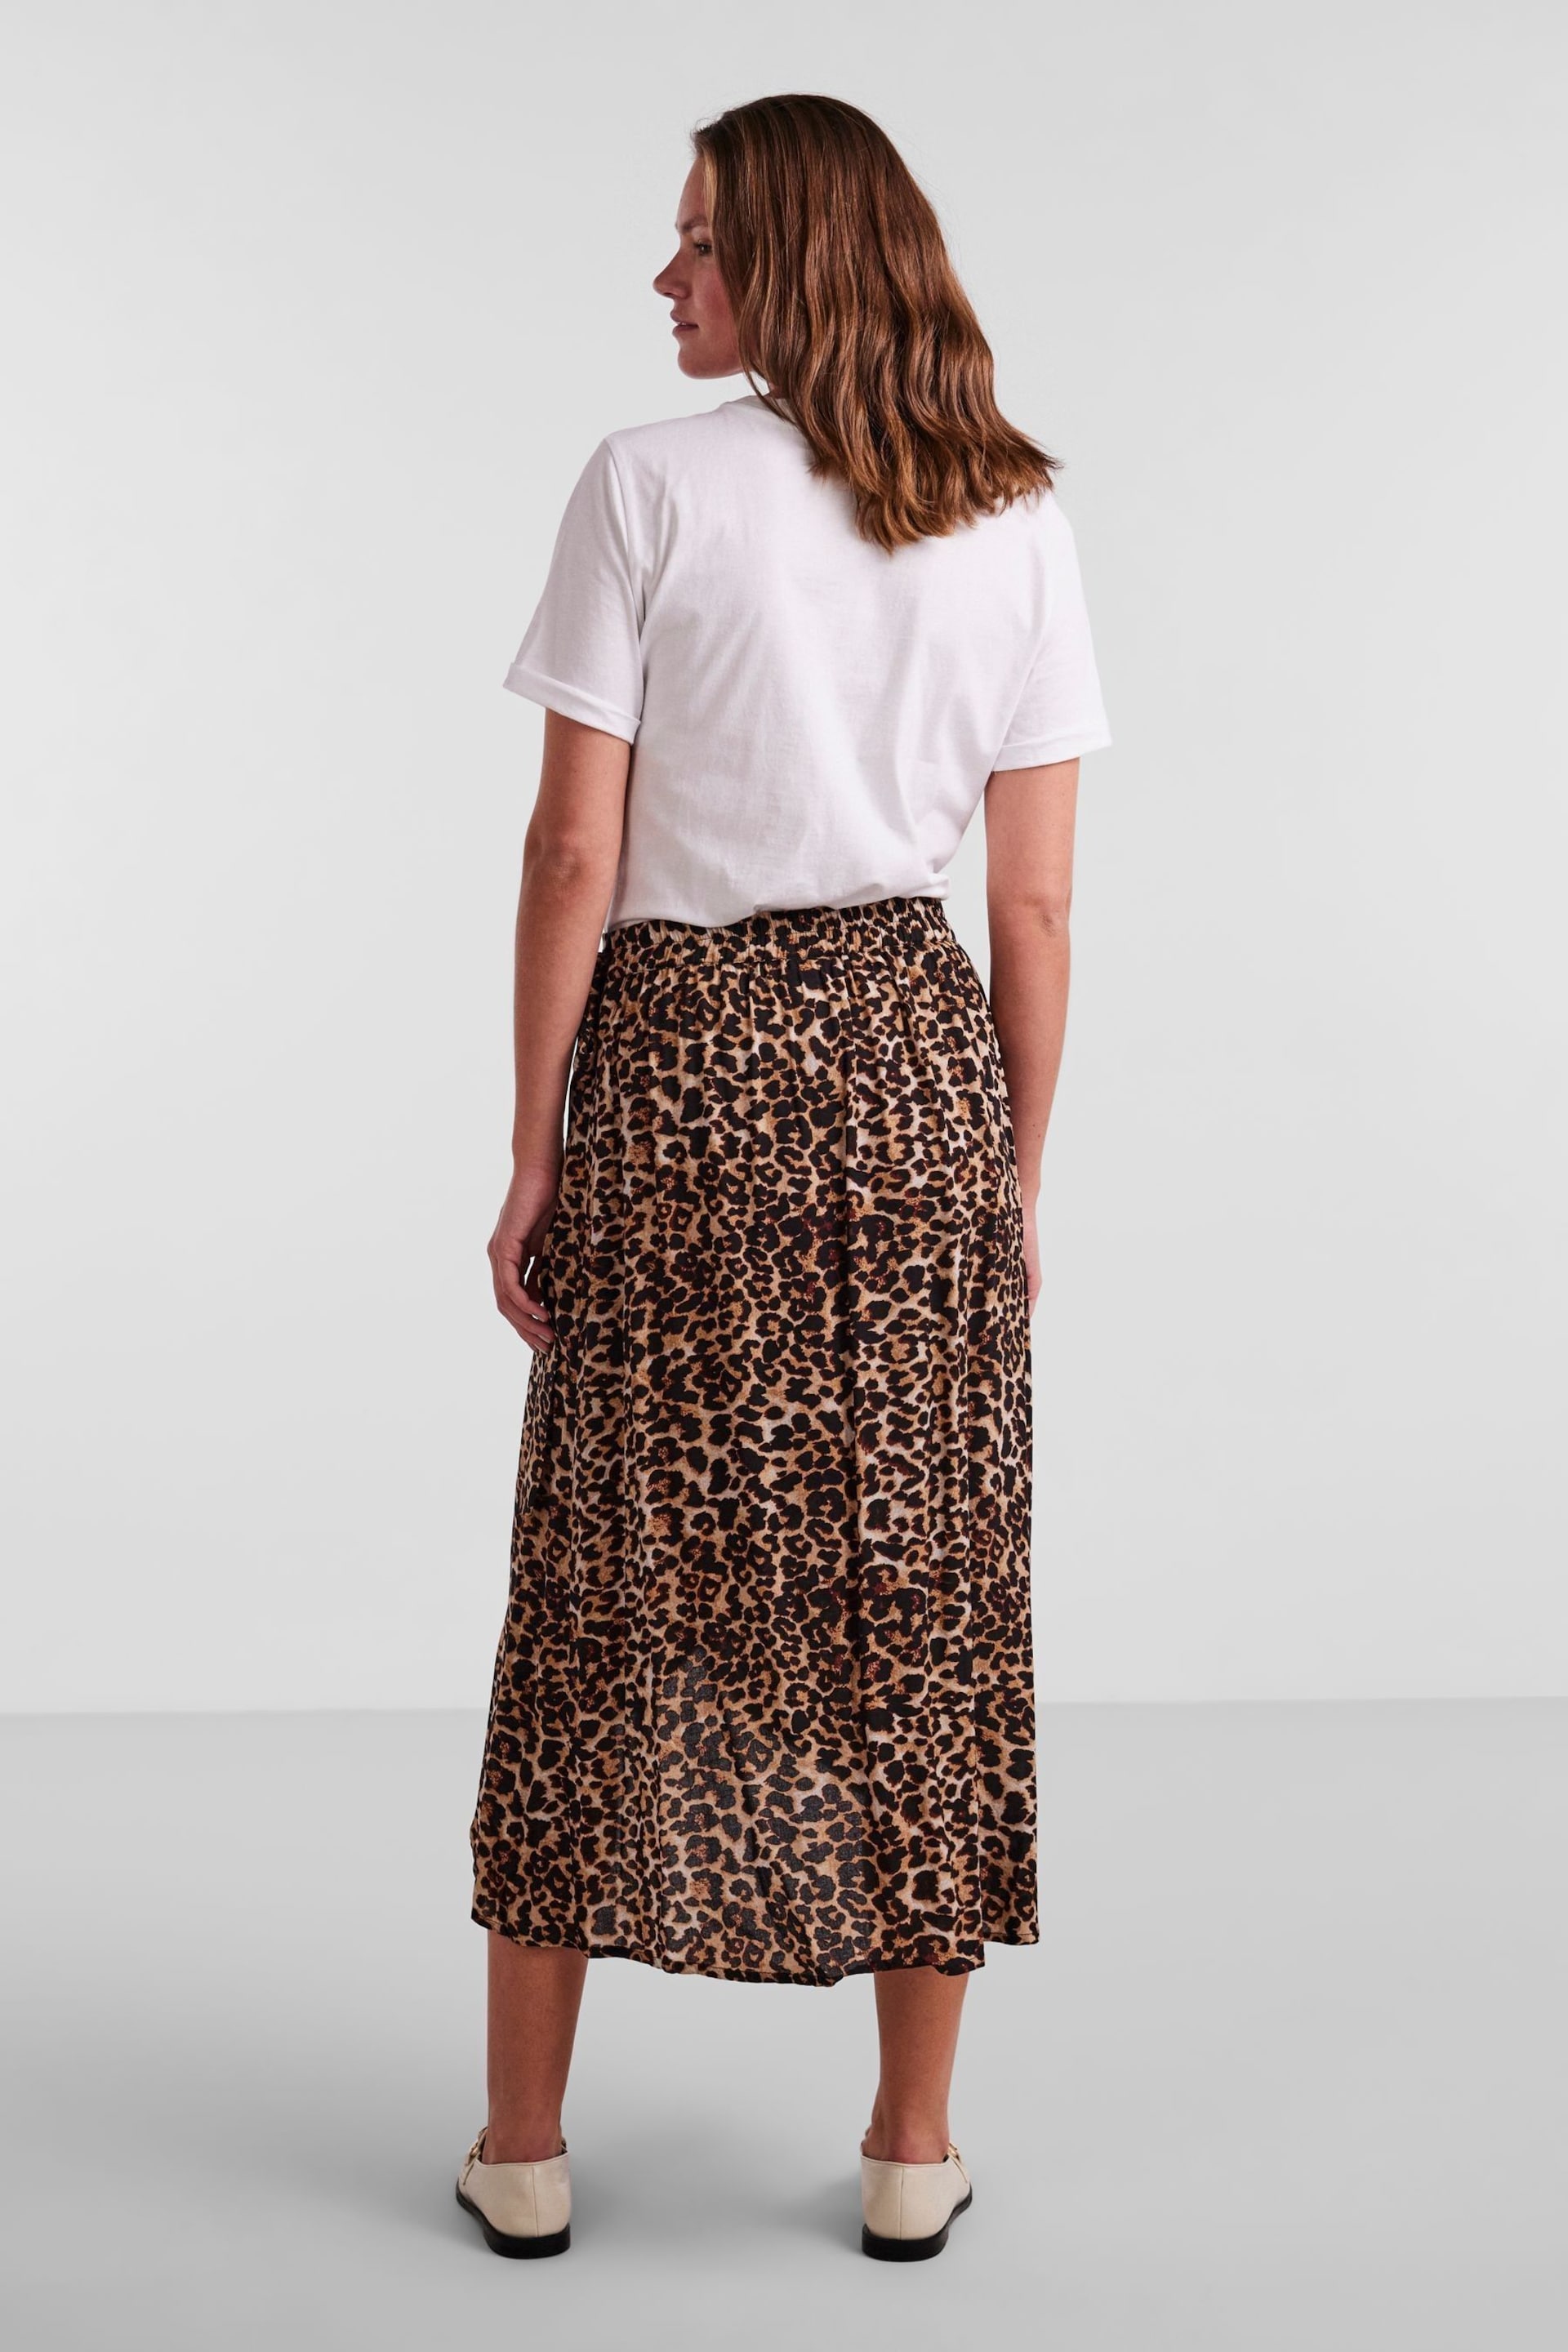 PIECES Leopard Print Printed Midi Wrap Skirt - Image 4 of 5